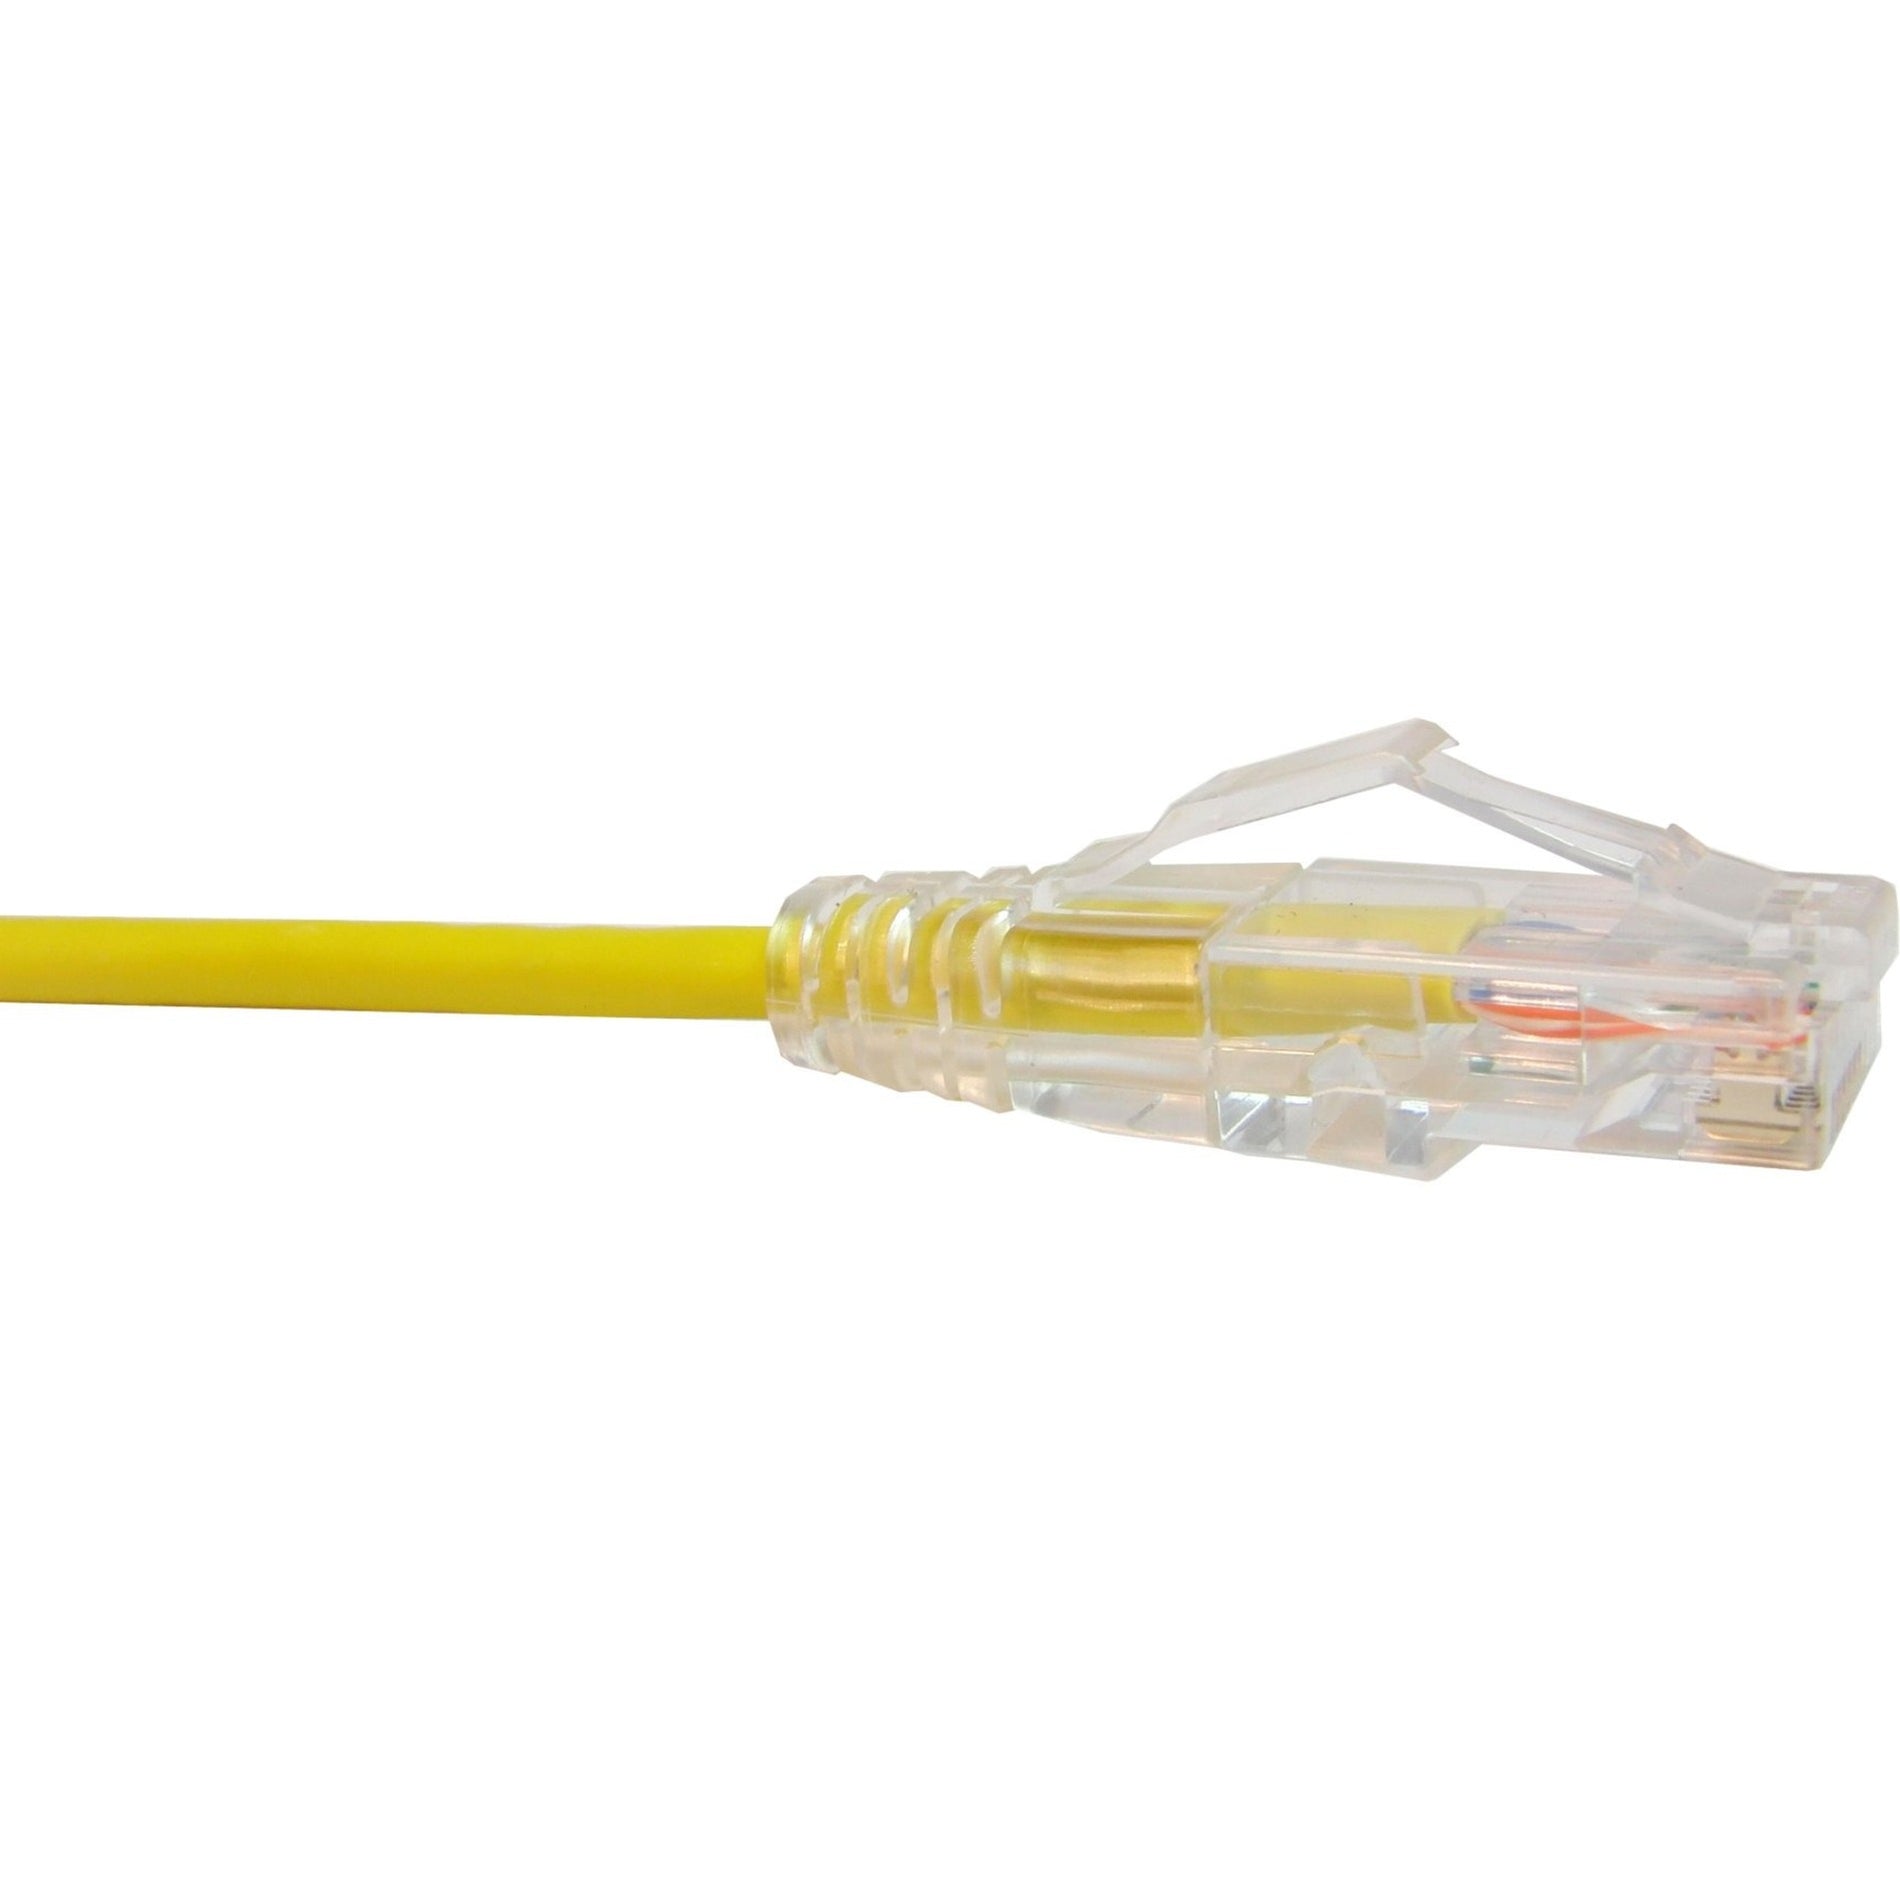 Unirise CS6-05F-YLW Clearfit Slim Cat6 Patch Cable, Snagless, Yellow, 5ft